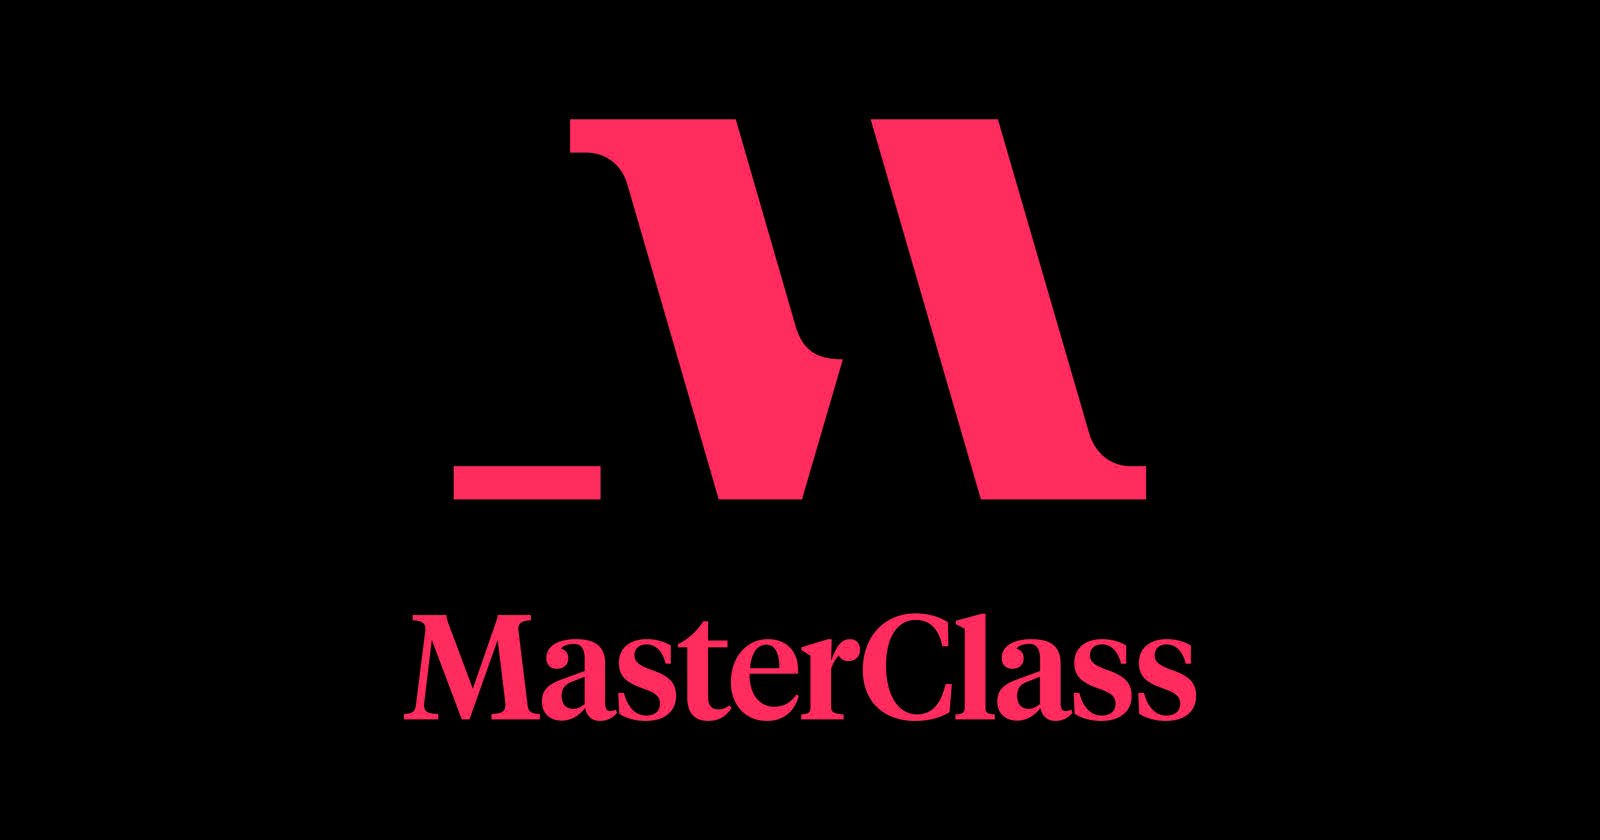 MasterClass Accused of Violating Customer Privacy by Secretly Sending Info to Meta